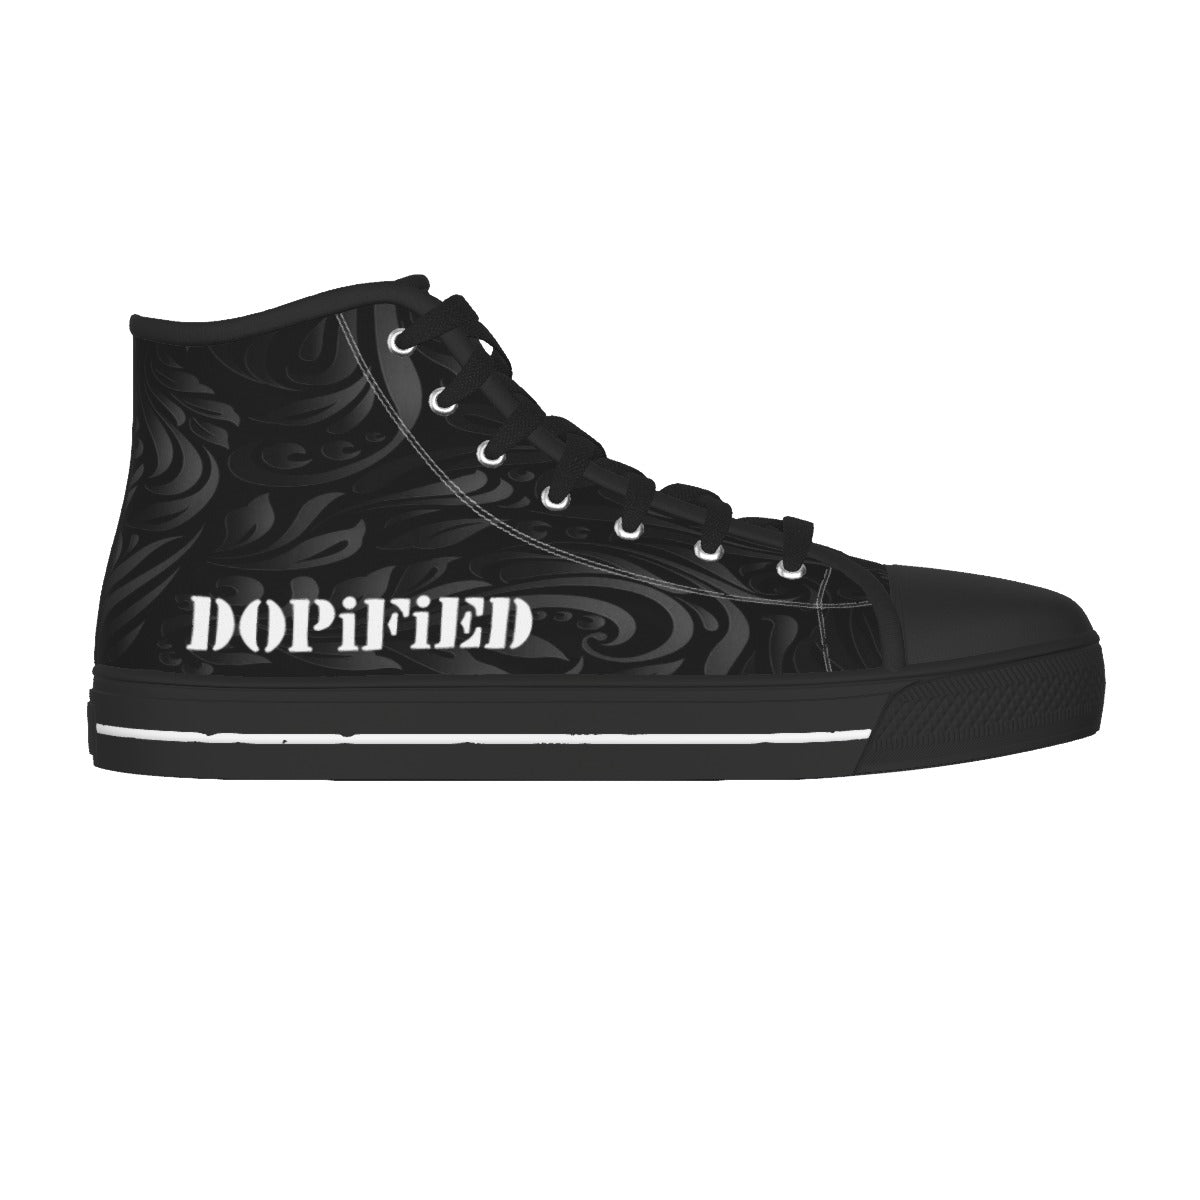 Bro's  DOPiFiED Black Sole Canvas Shoes